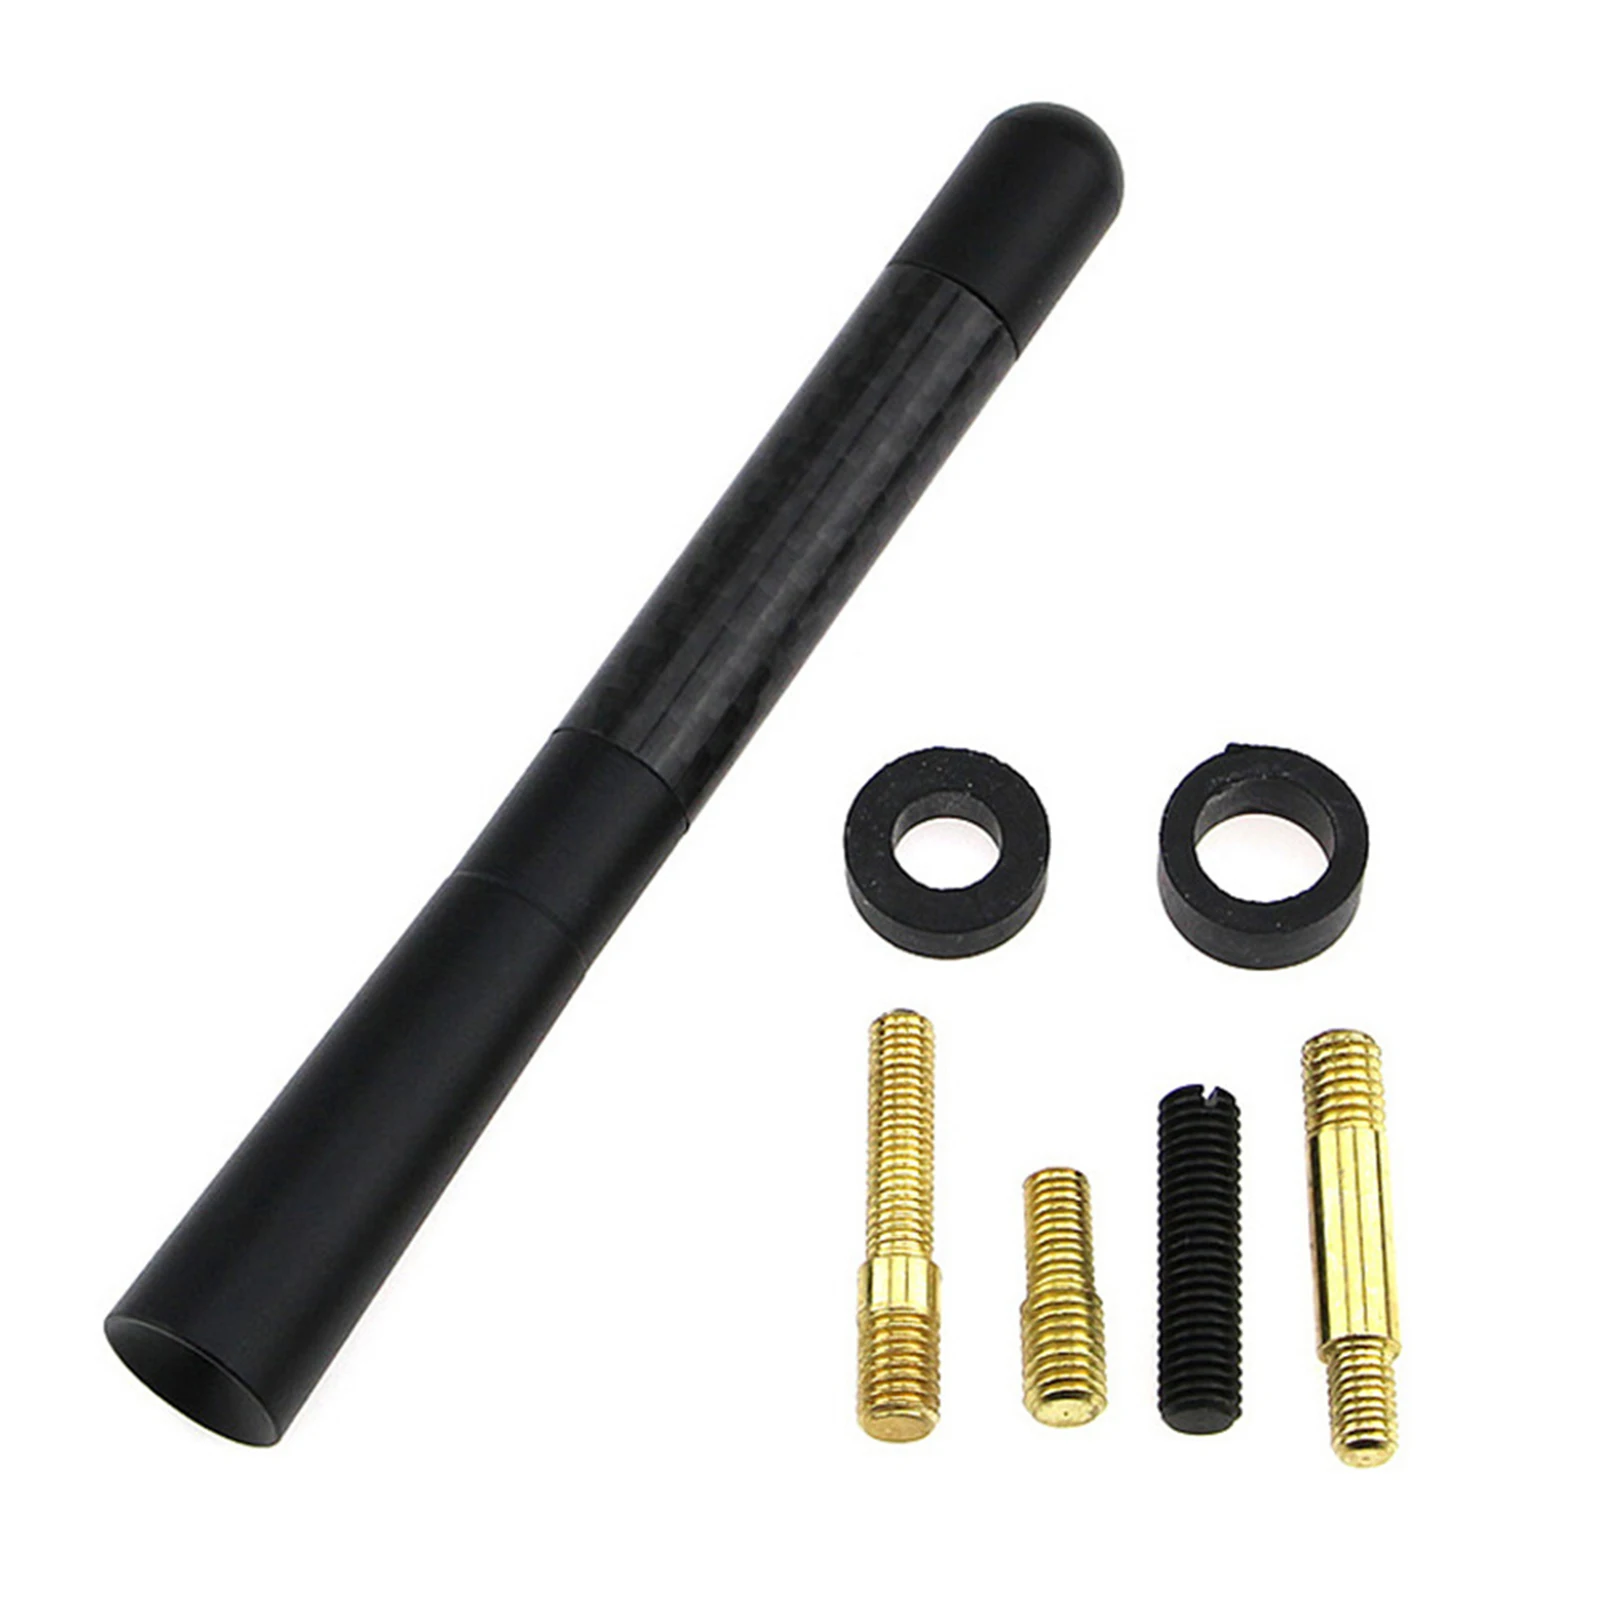 

Bullet Antenna Car Antenna Hard Anodized Black Finish Receivers For Cars Signals Enhancers For Lorry SUV Pickup Truck